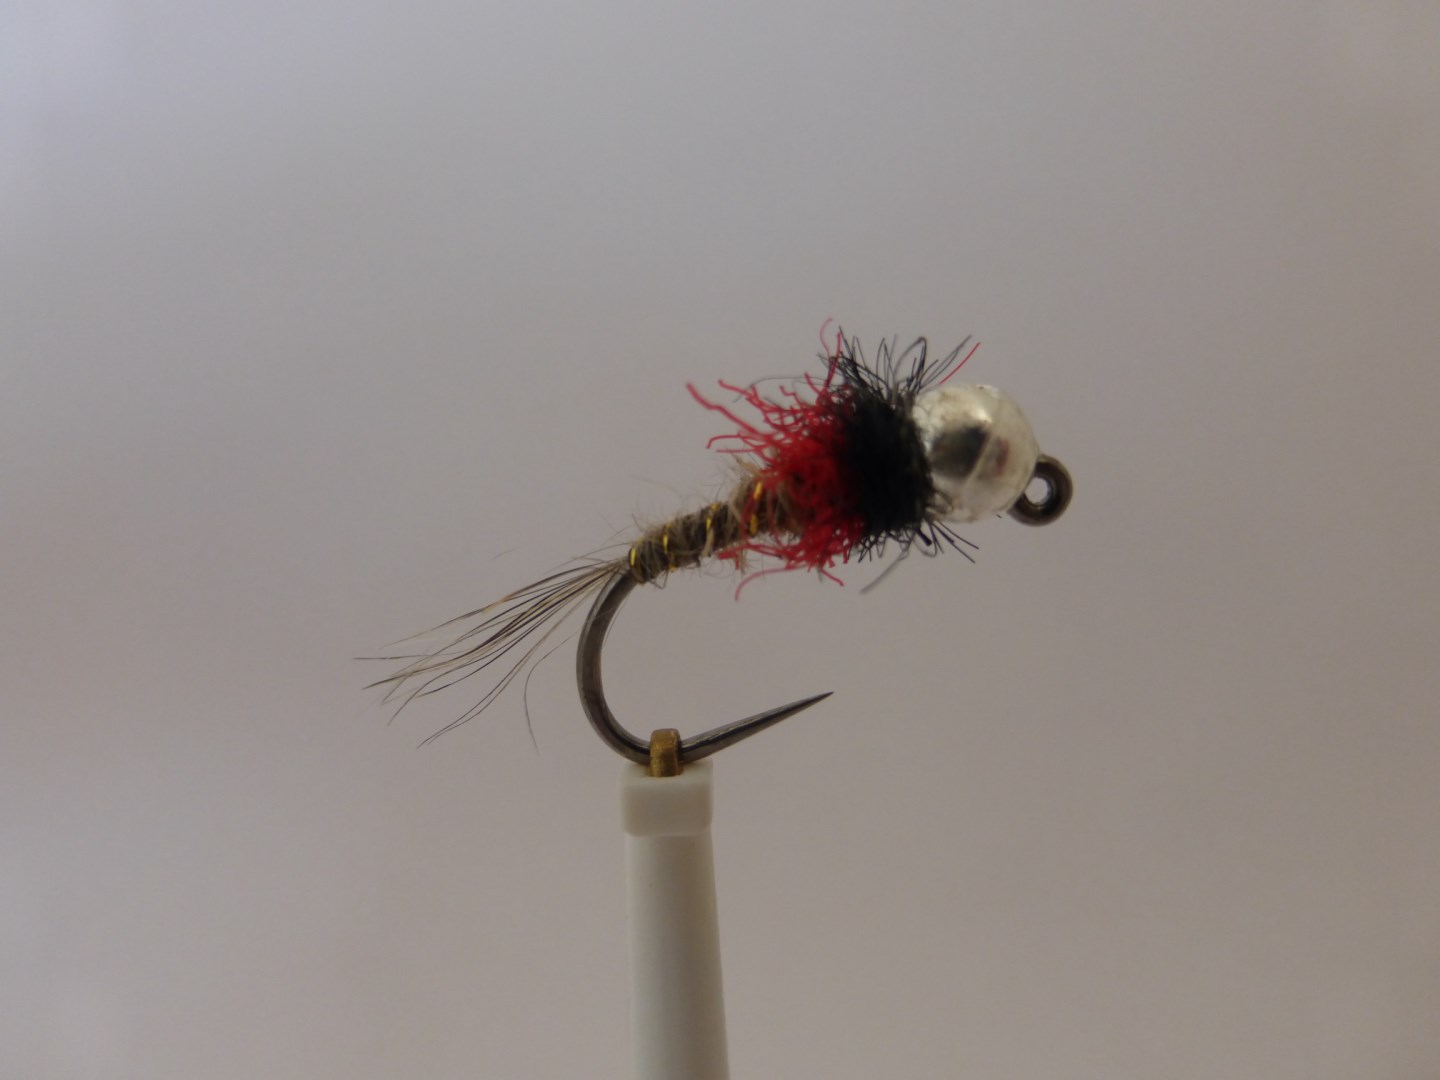 Size 16 Tungsten Hare,s Ear Silver - Barbless